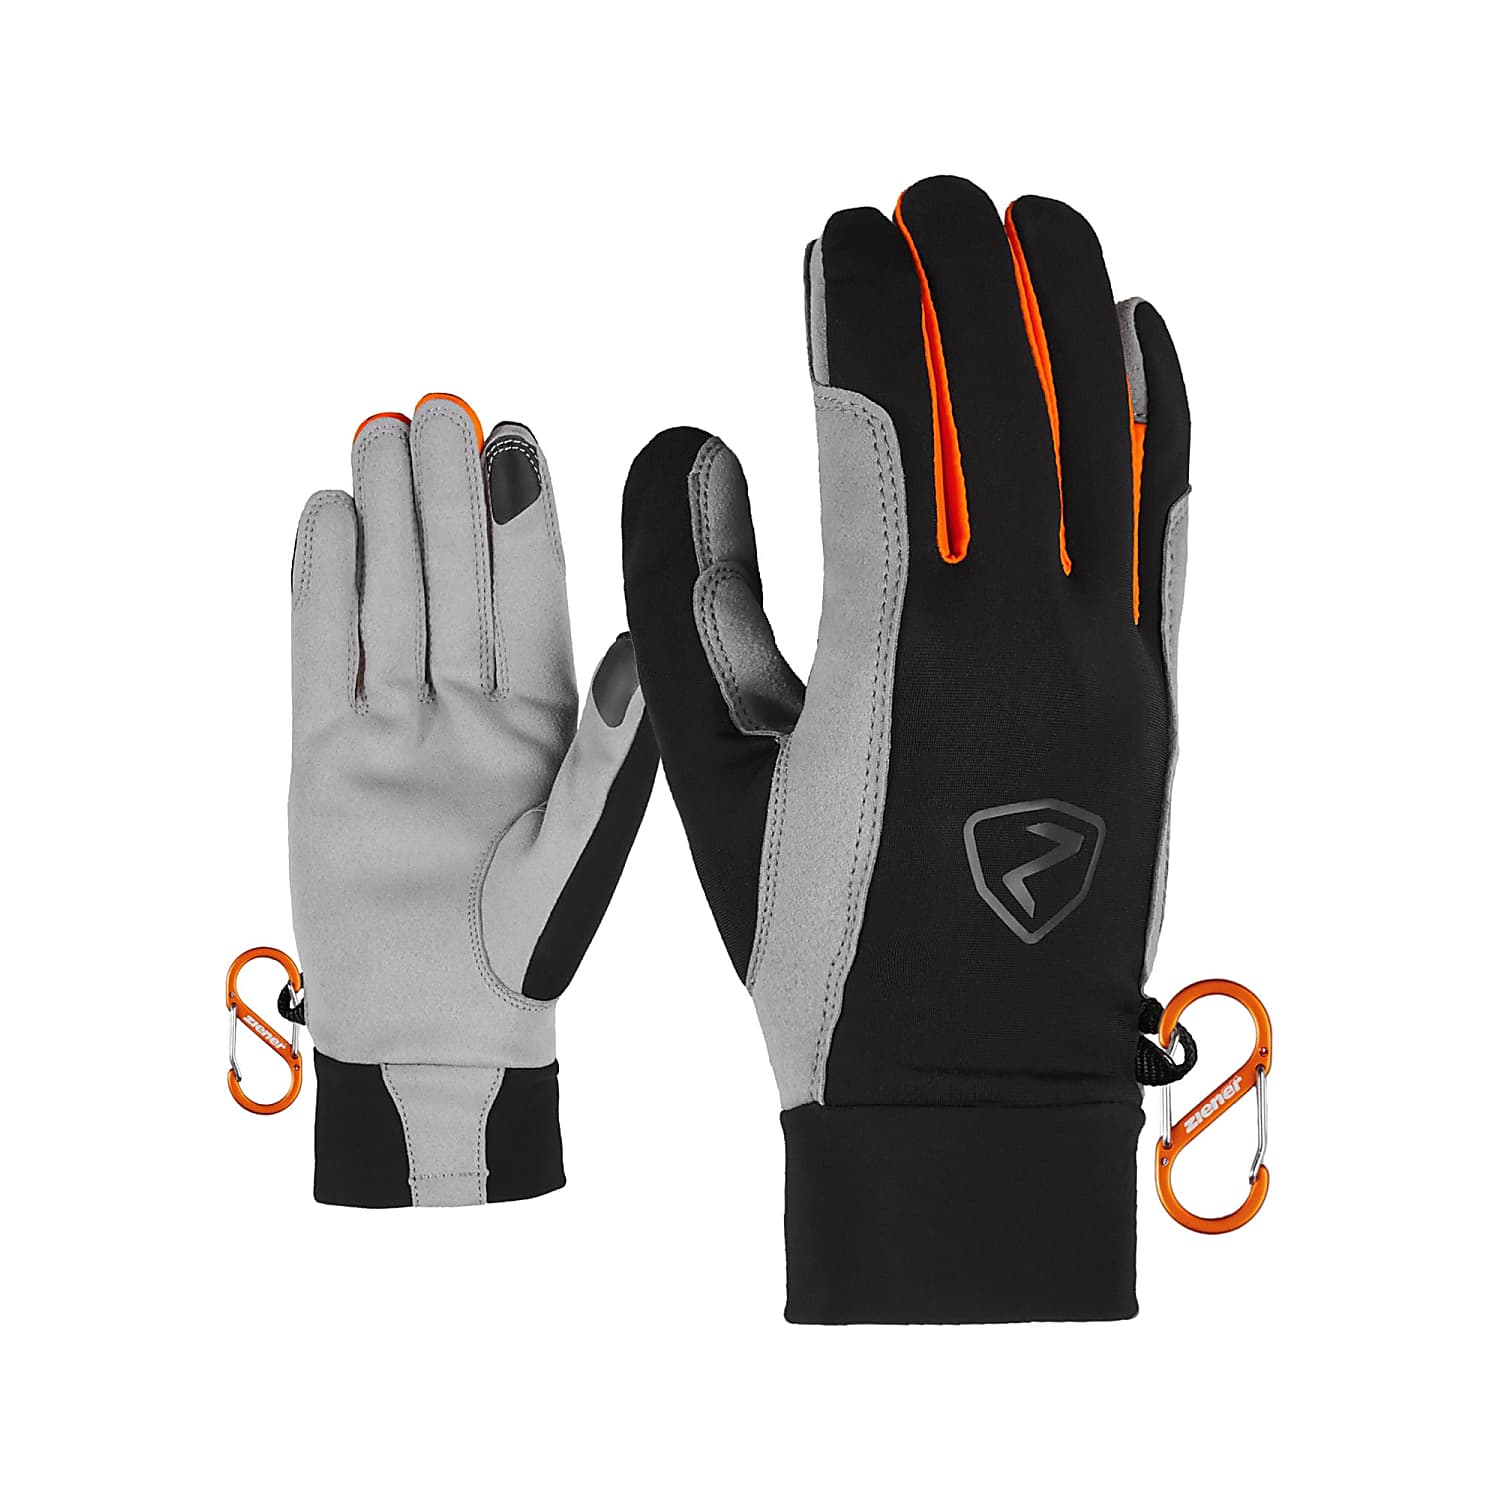 Ziener GUSTY TOUCH GLOVE, and New Fast Black shipping cheap Orange - 